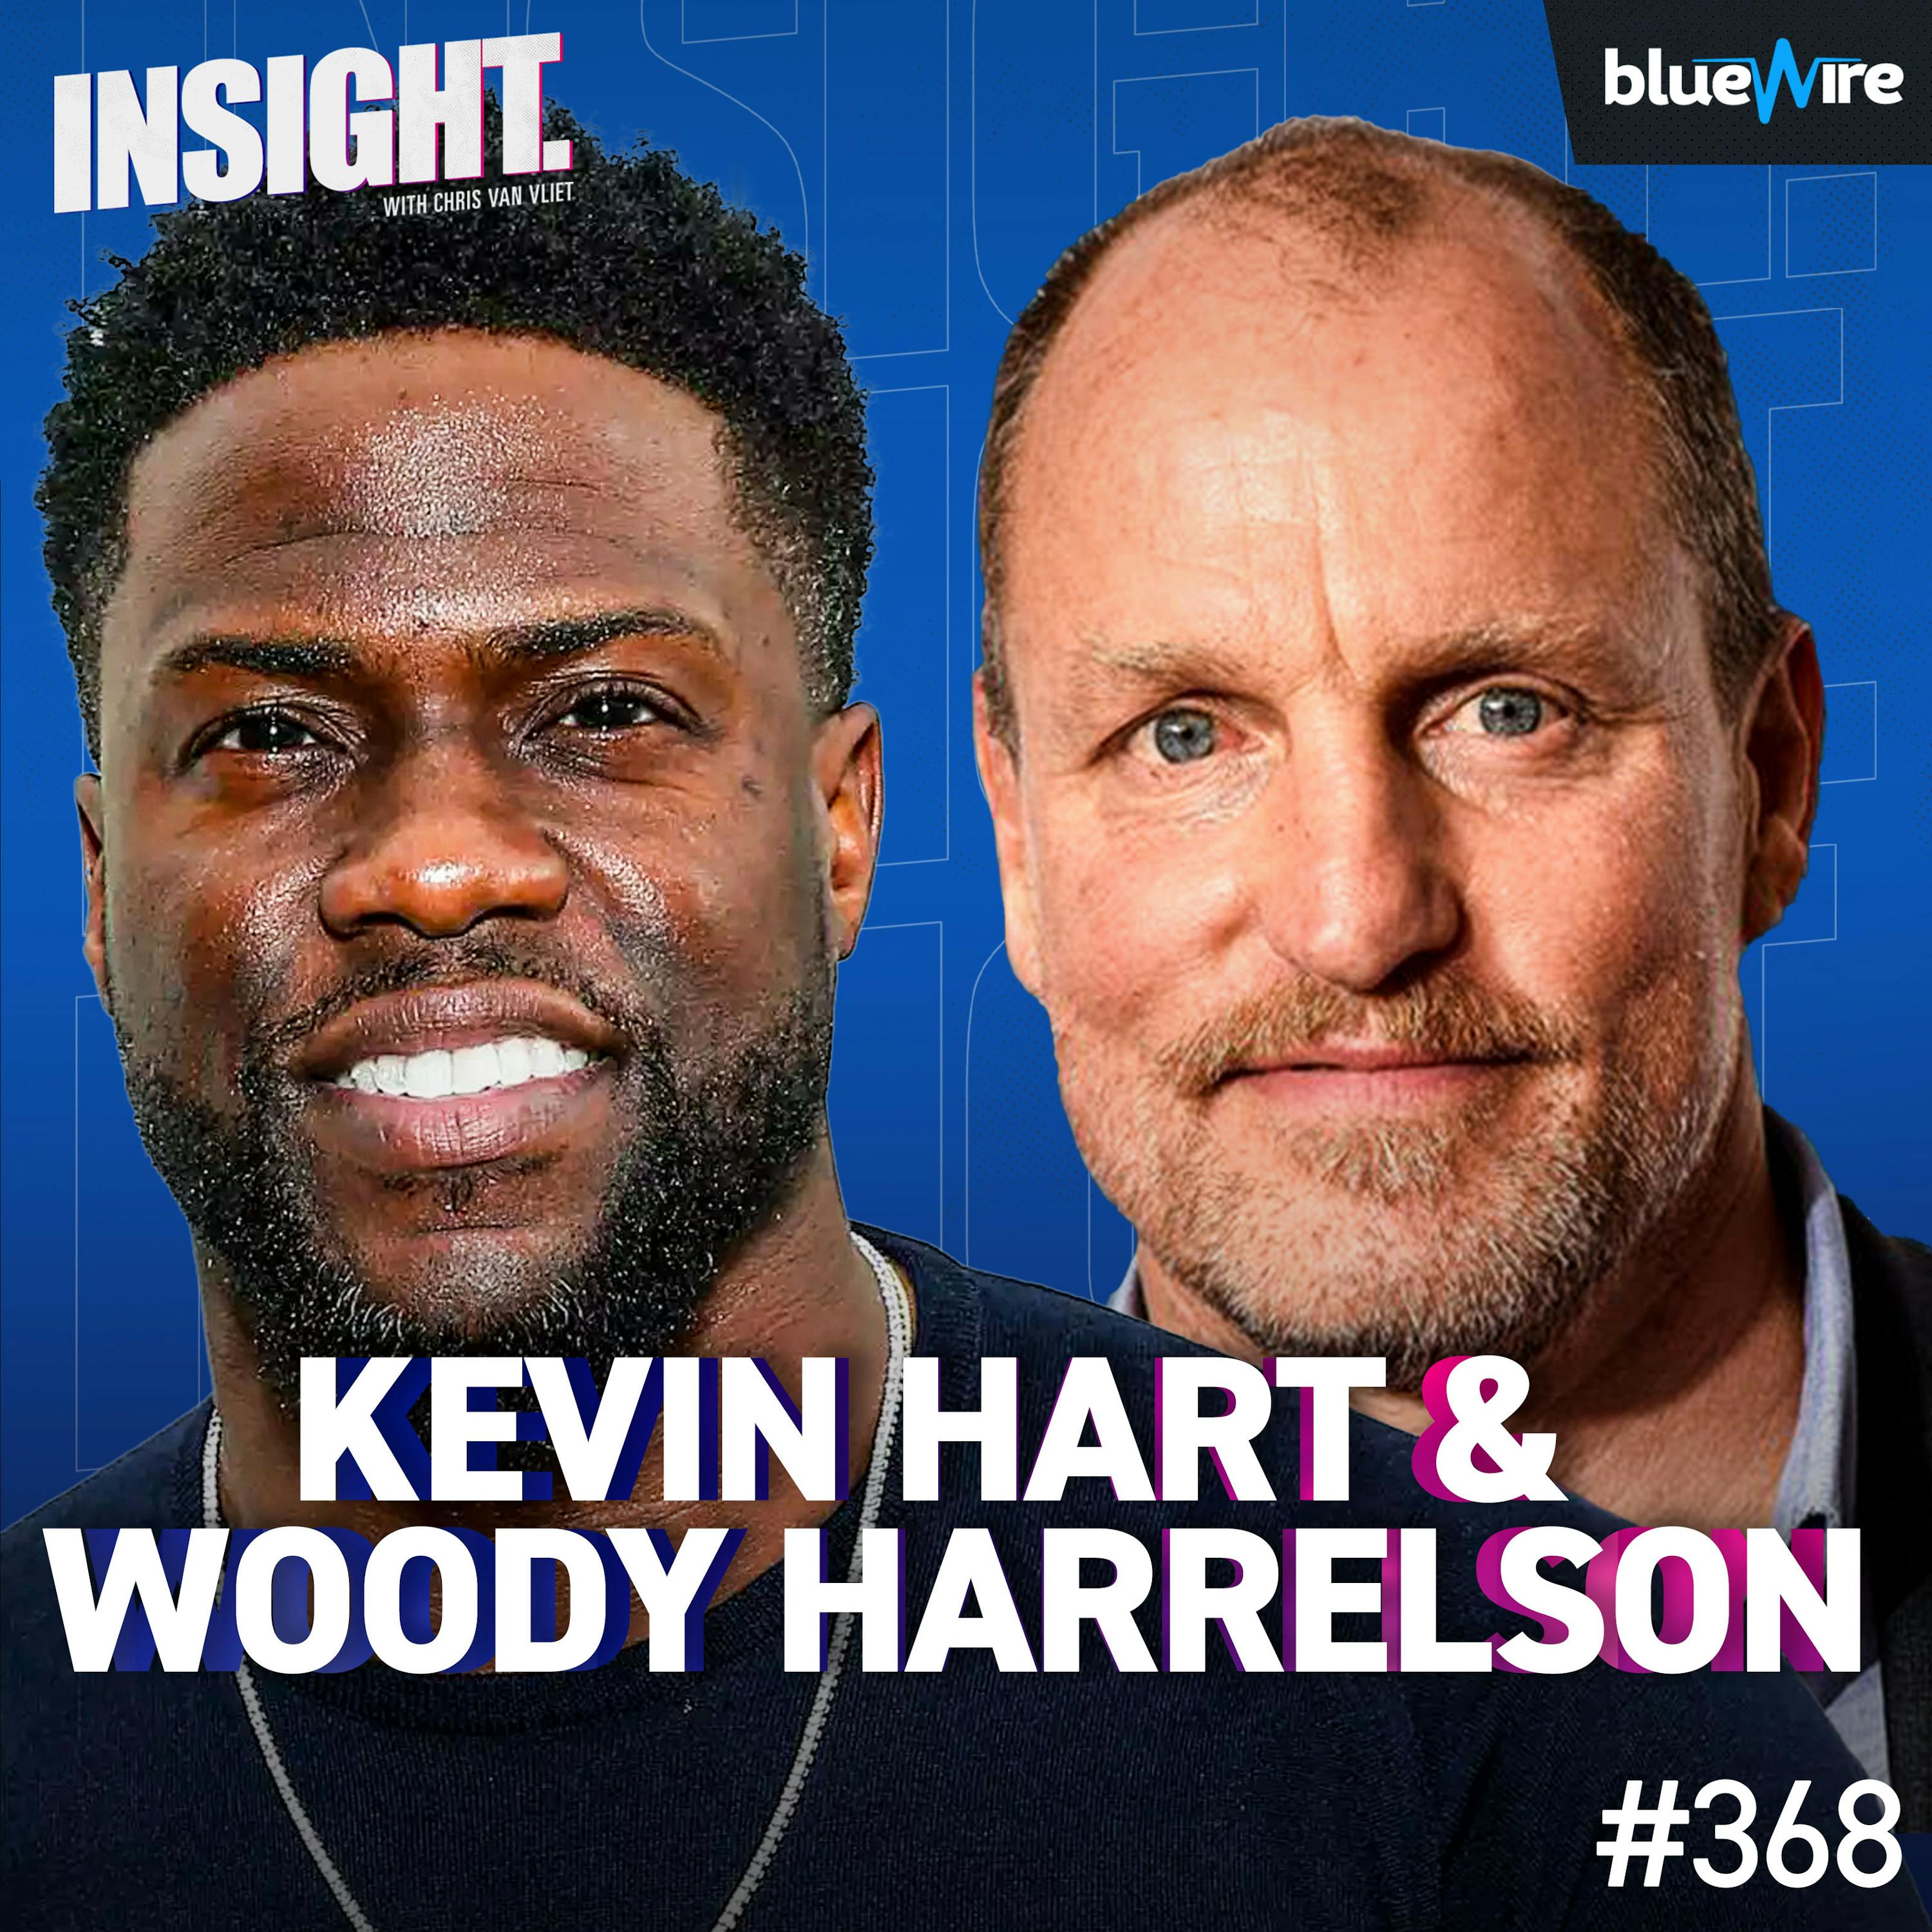 Kevin Hart & Woody Harrelson Are Absolute Legends! Image